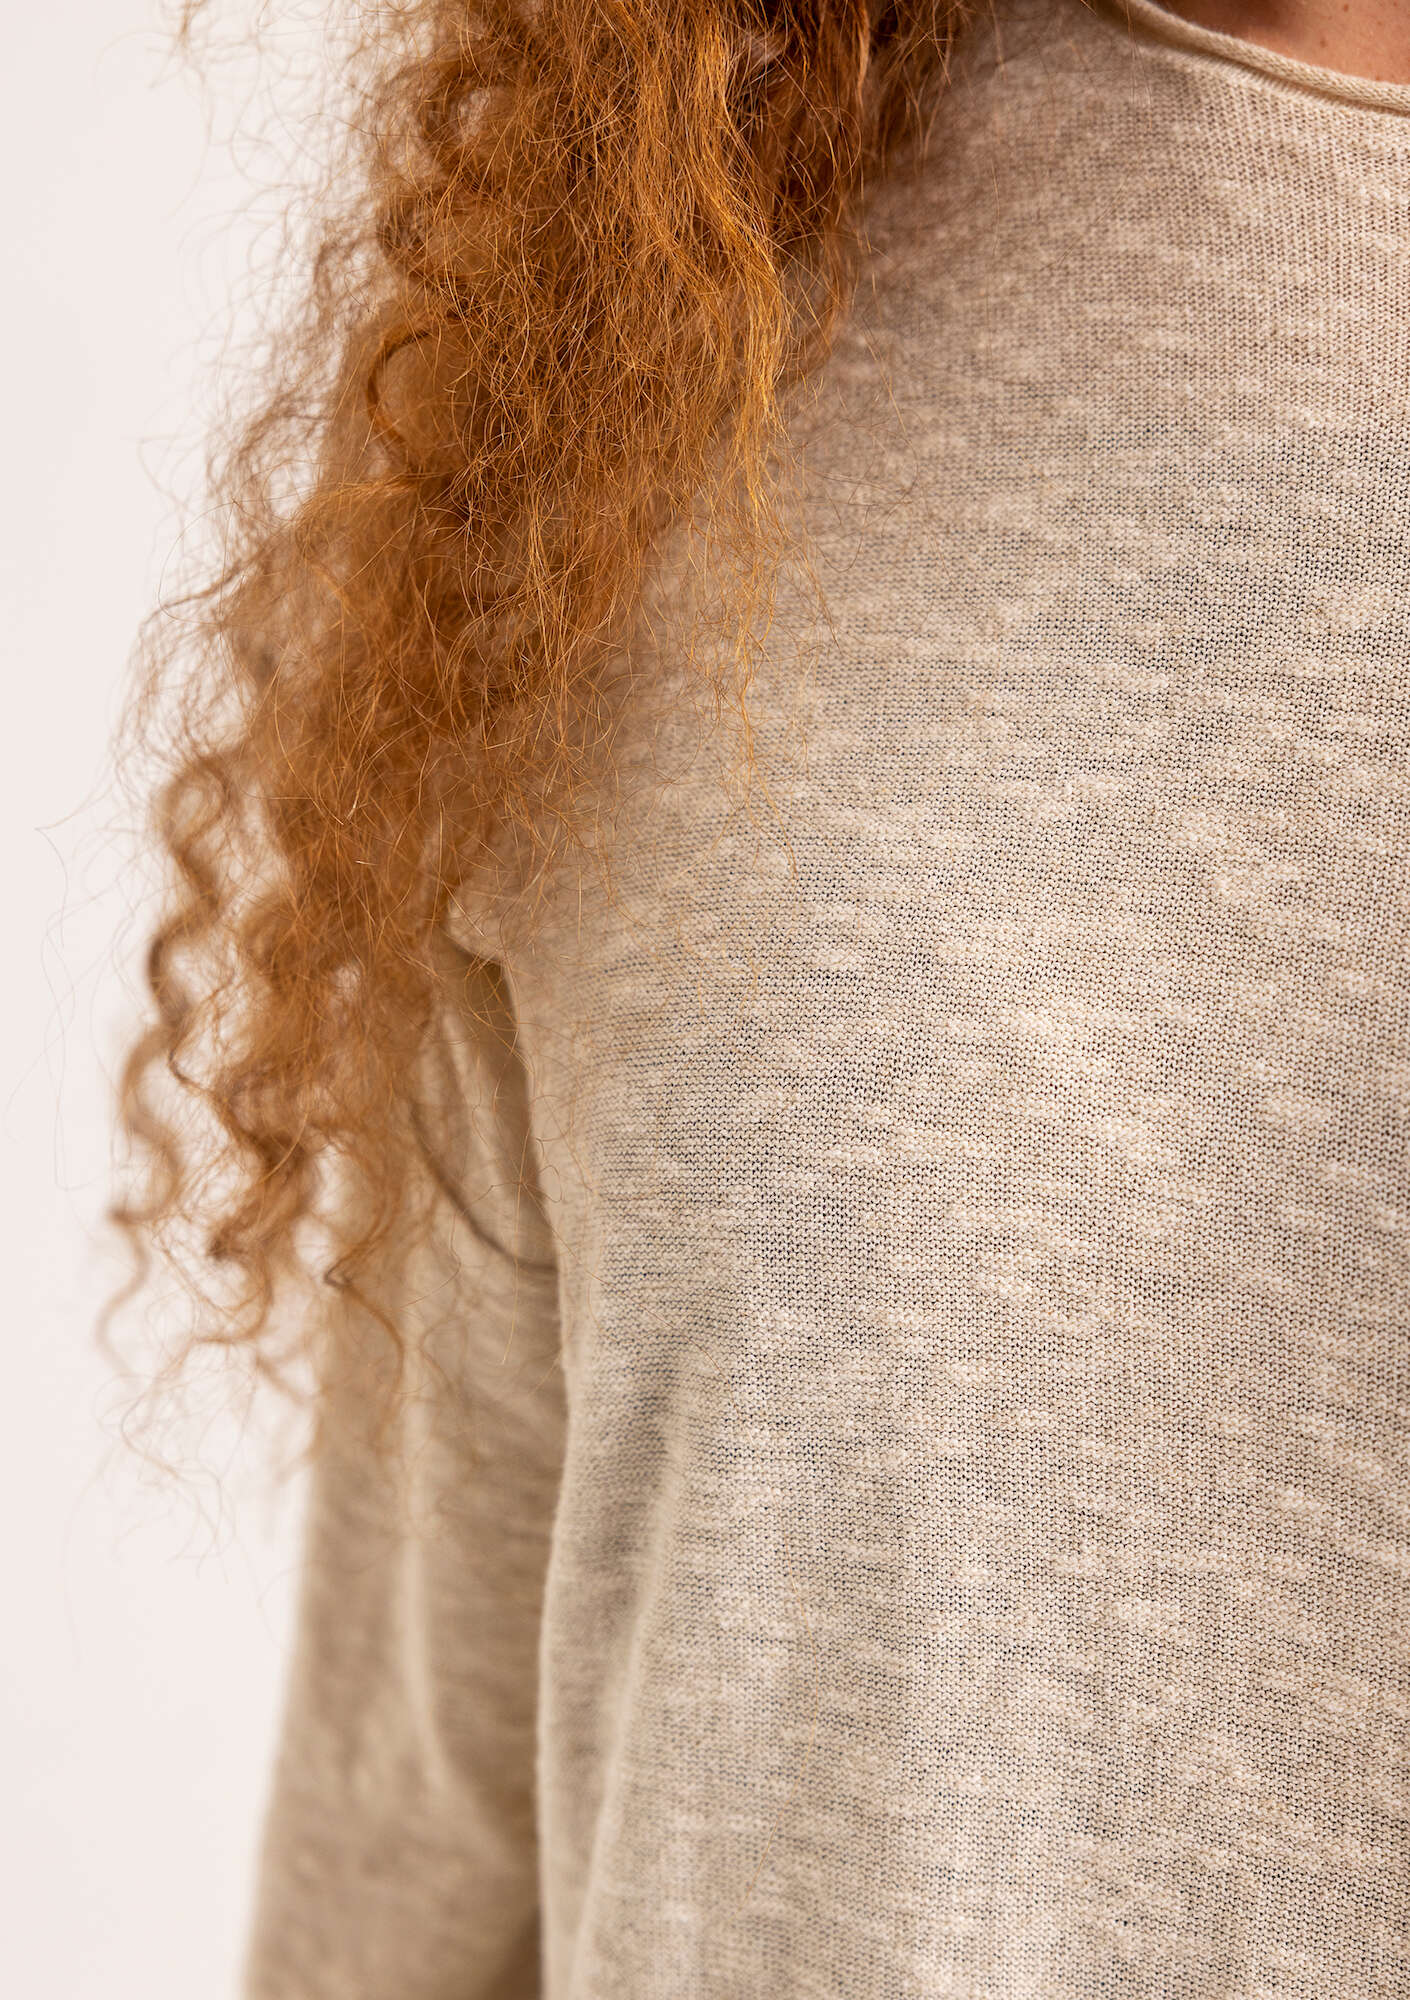 Knit long sweater in linen/organic cotton undyed